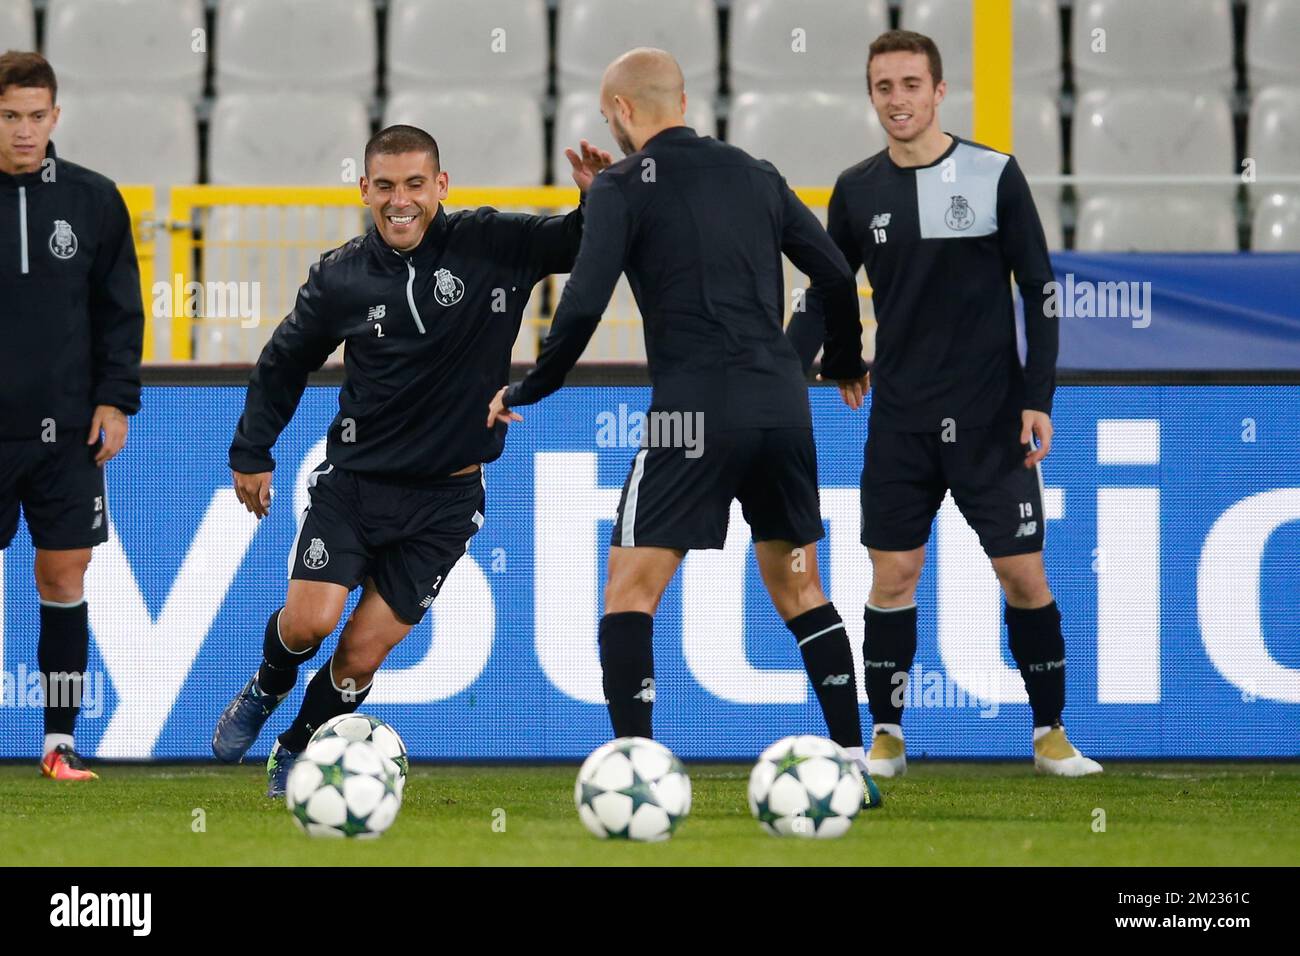 Porto's defender Maxi Pereira and Porto's forward Diogo Jota pictured during a training session of Portugese first division soccer team FC Porto in Brugge, Monday 17 October 2016. Club Brugge and FC Porto are preparing for the third game in the UEFA Champions League competition tomorrow. BELGA PHOTO BRUNO FAHY Stock Photo